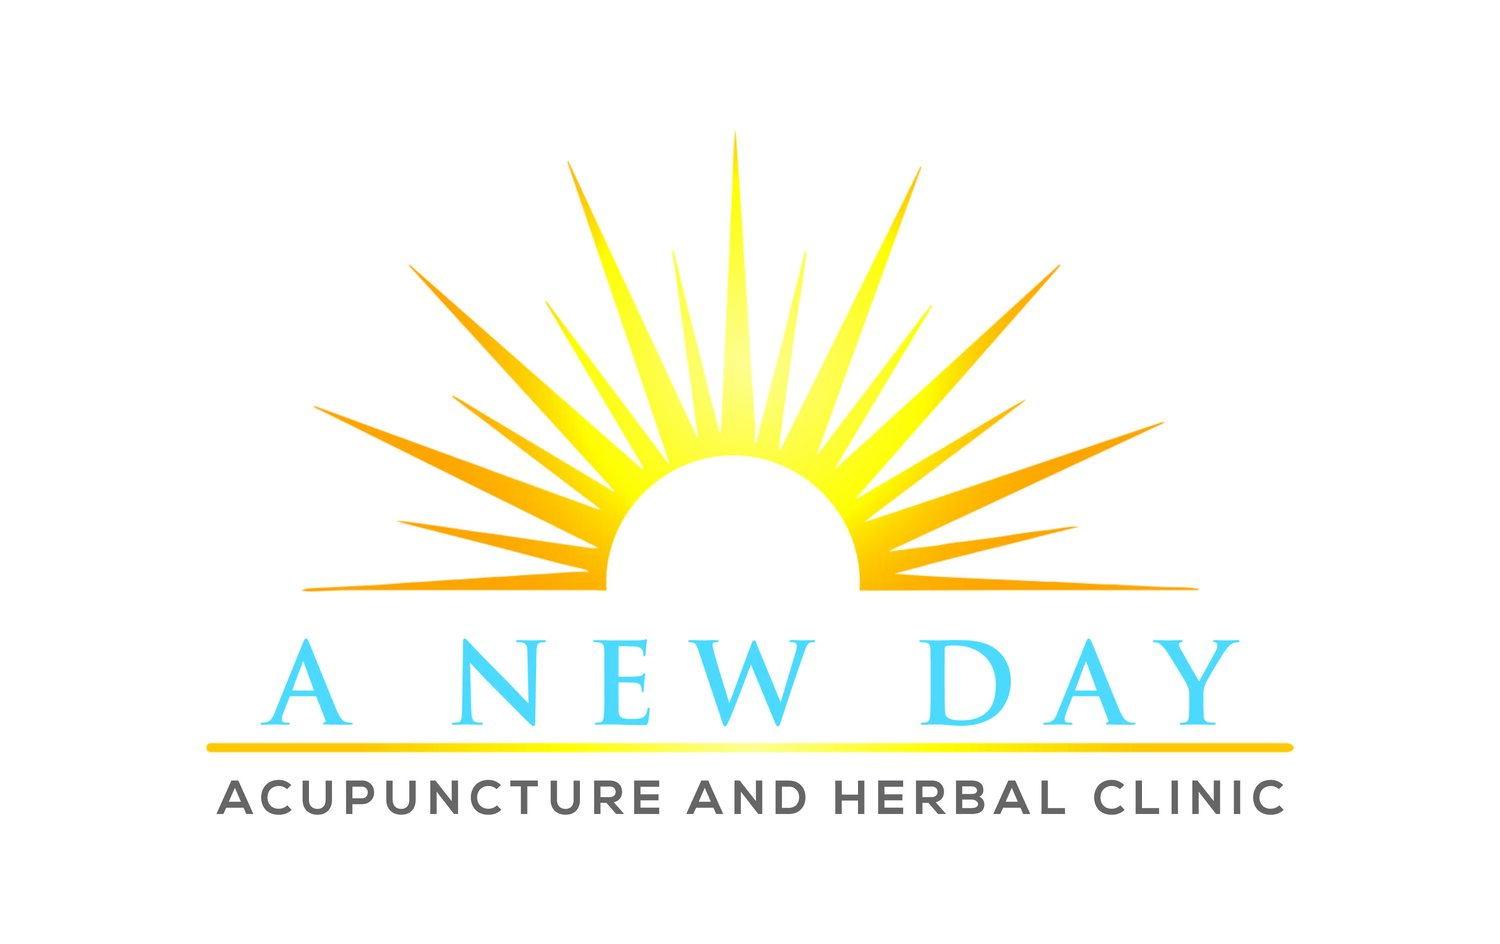 A New Day Acupuncture